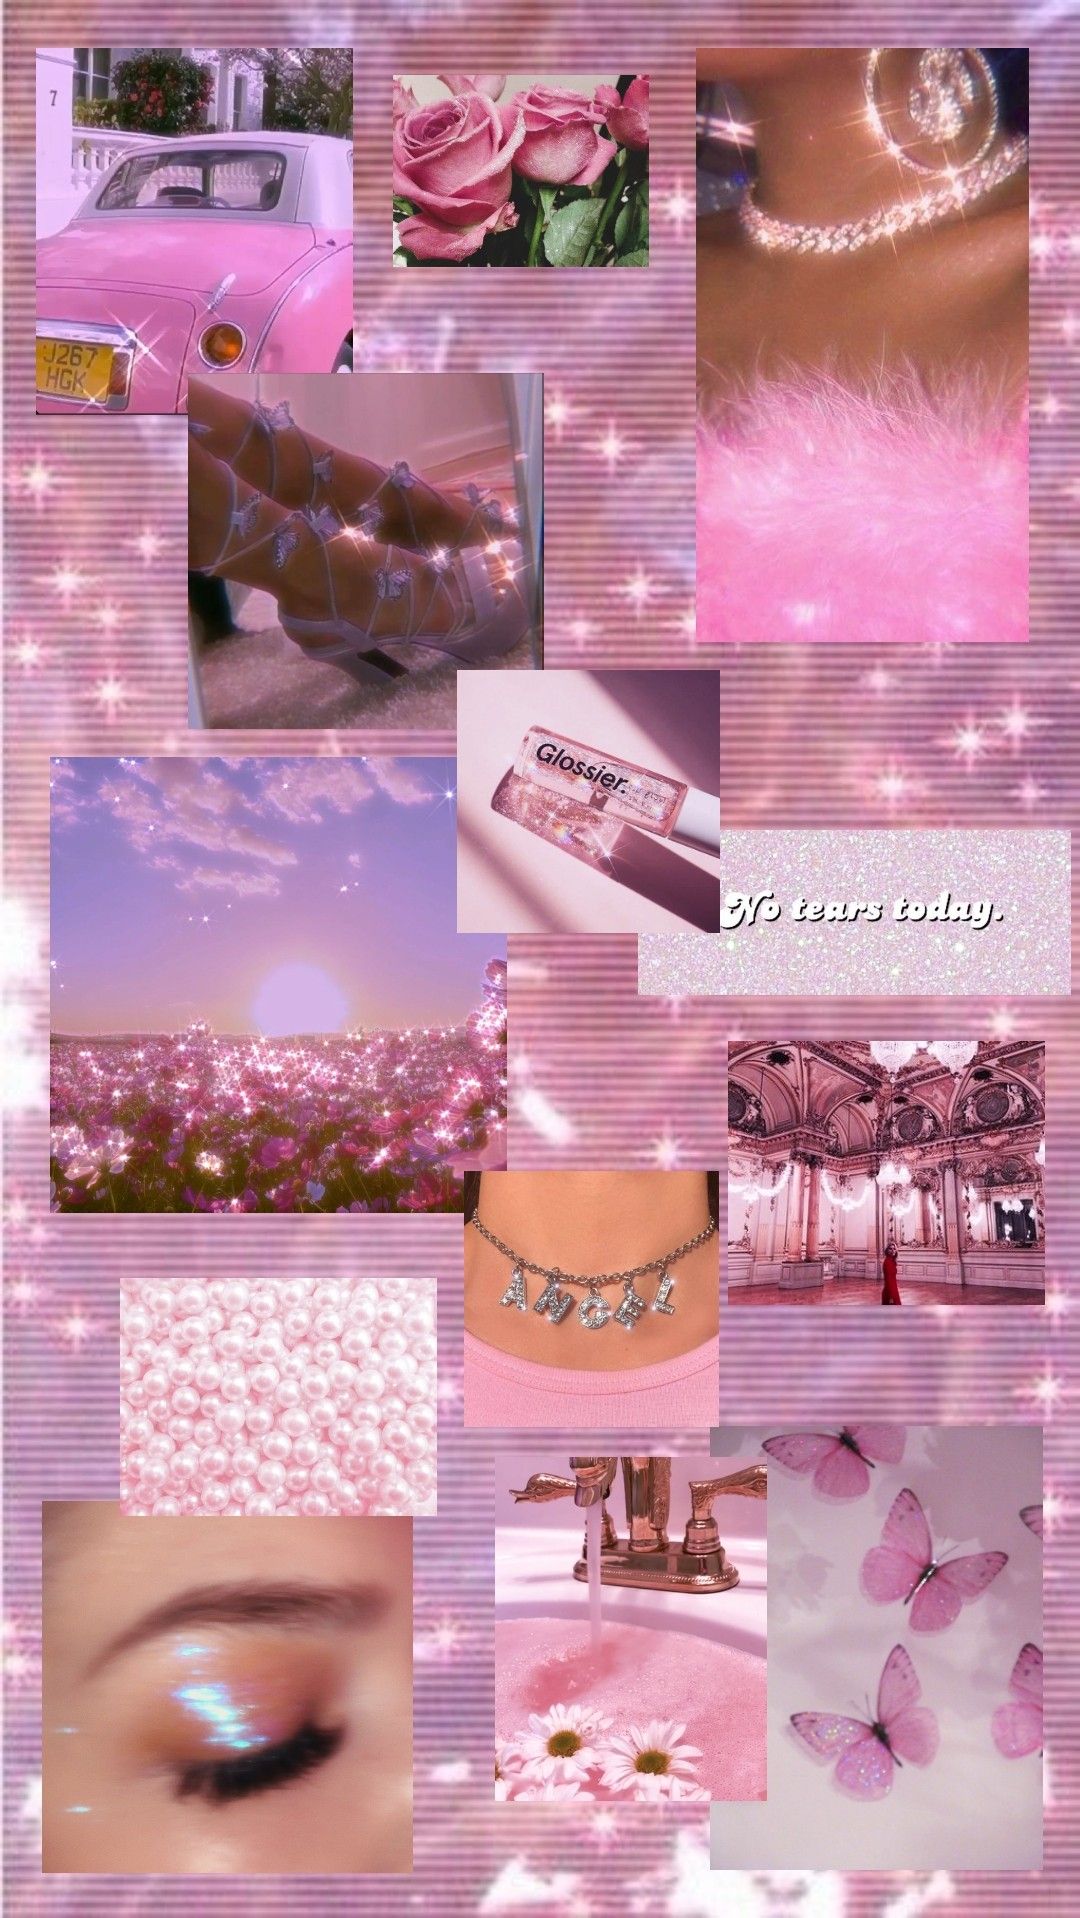 Soft pink aesthetic wallpaper. iPhone wallpaper girly, Pink wallpaper iphone, Aesthetic iphone wallpaper. Do not mention downloads or free downloads - Soft pink